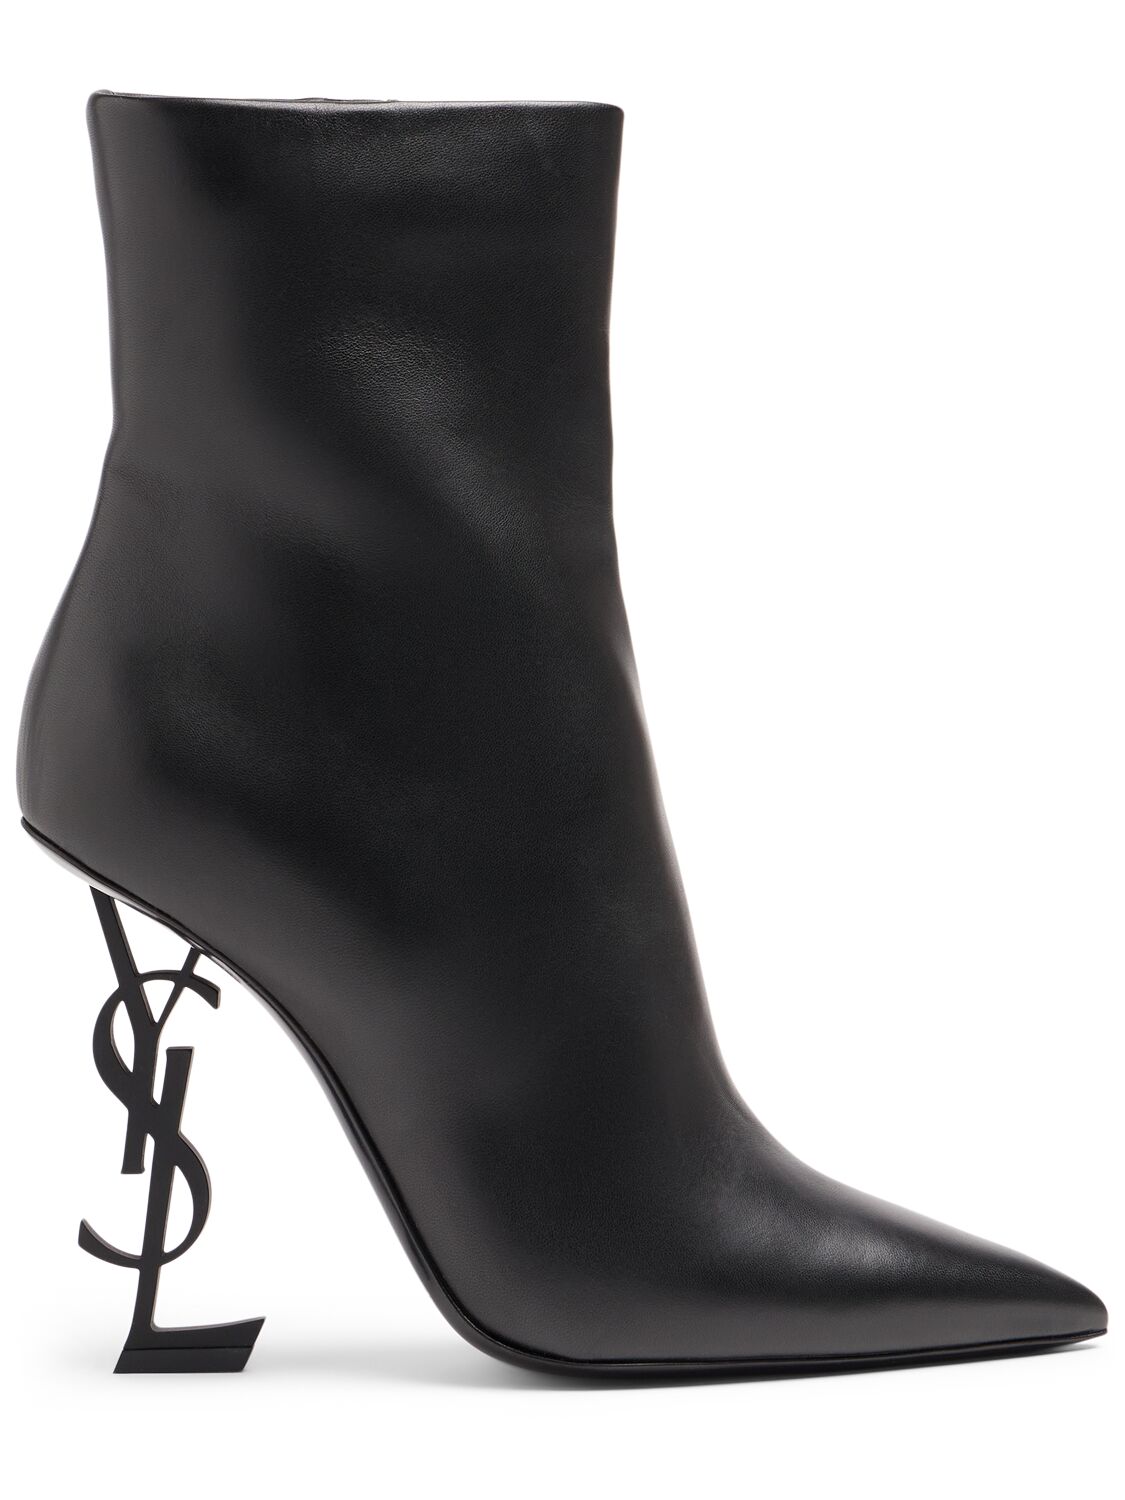 110mm Opyum Leather Boots